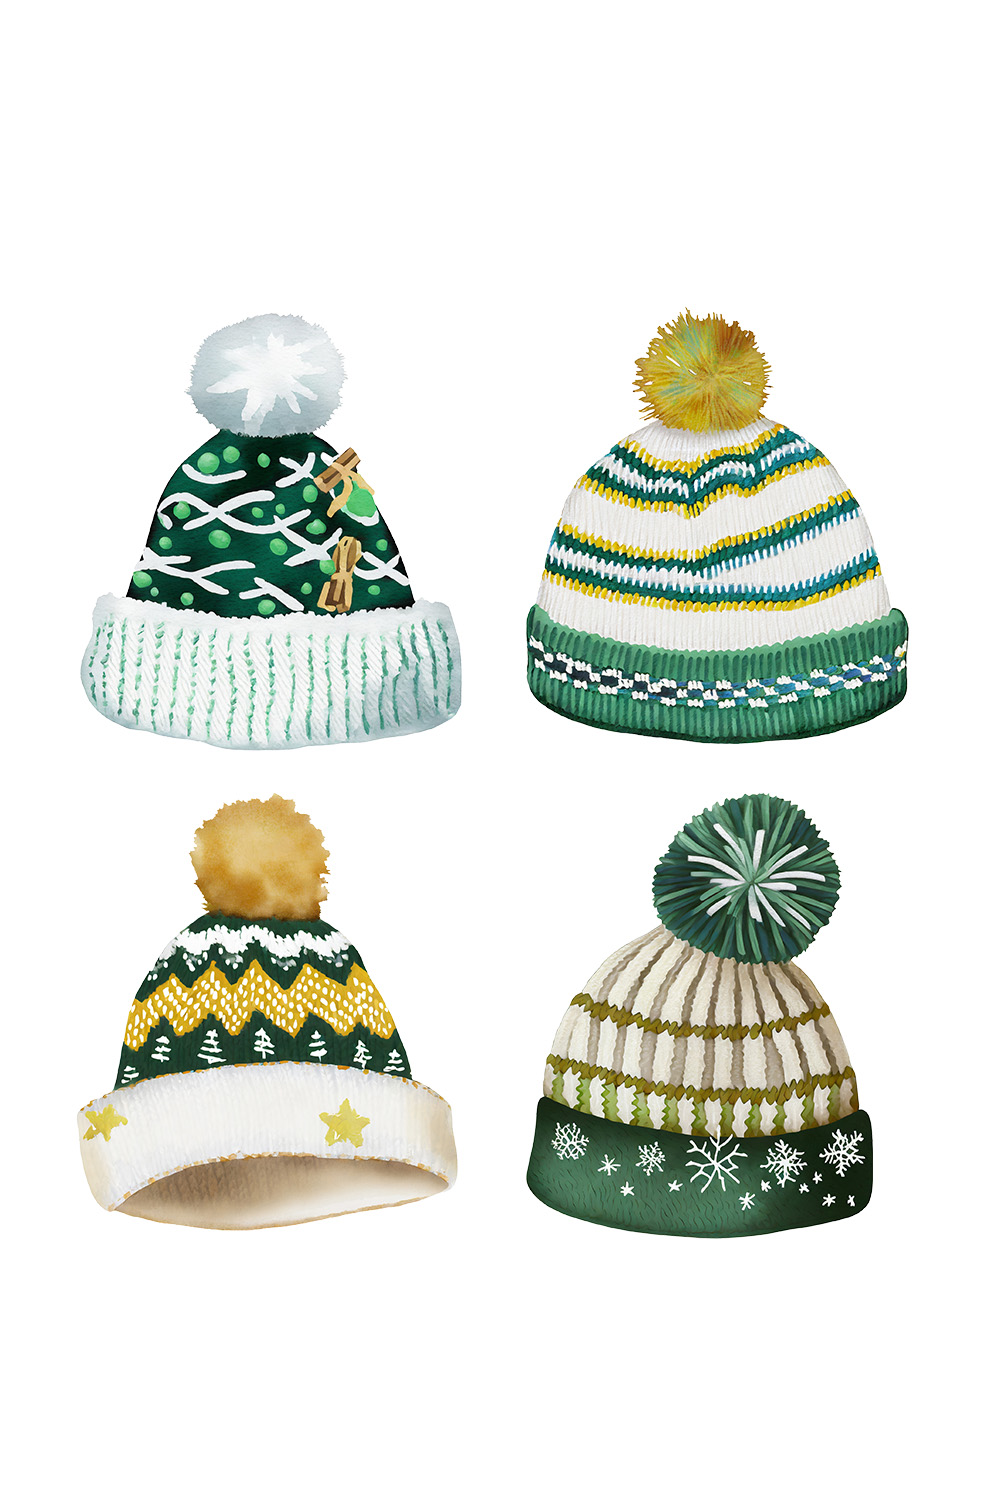 Christmas knit hat pinterest preview image.